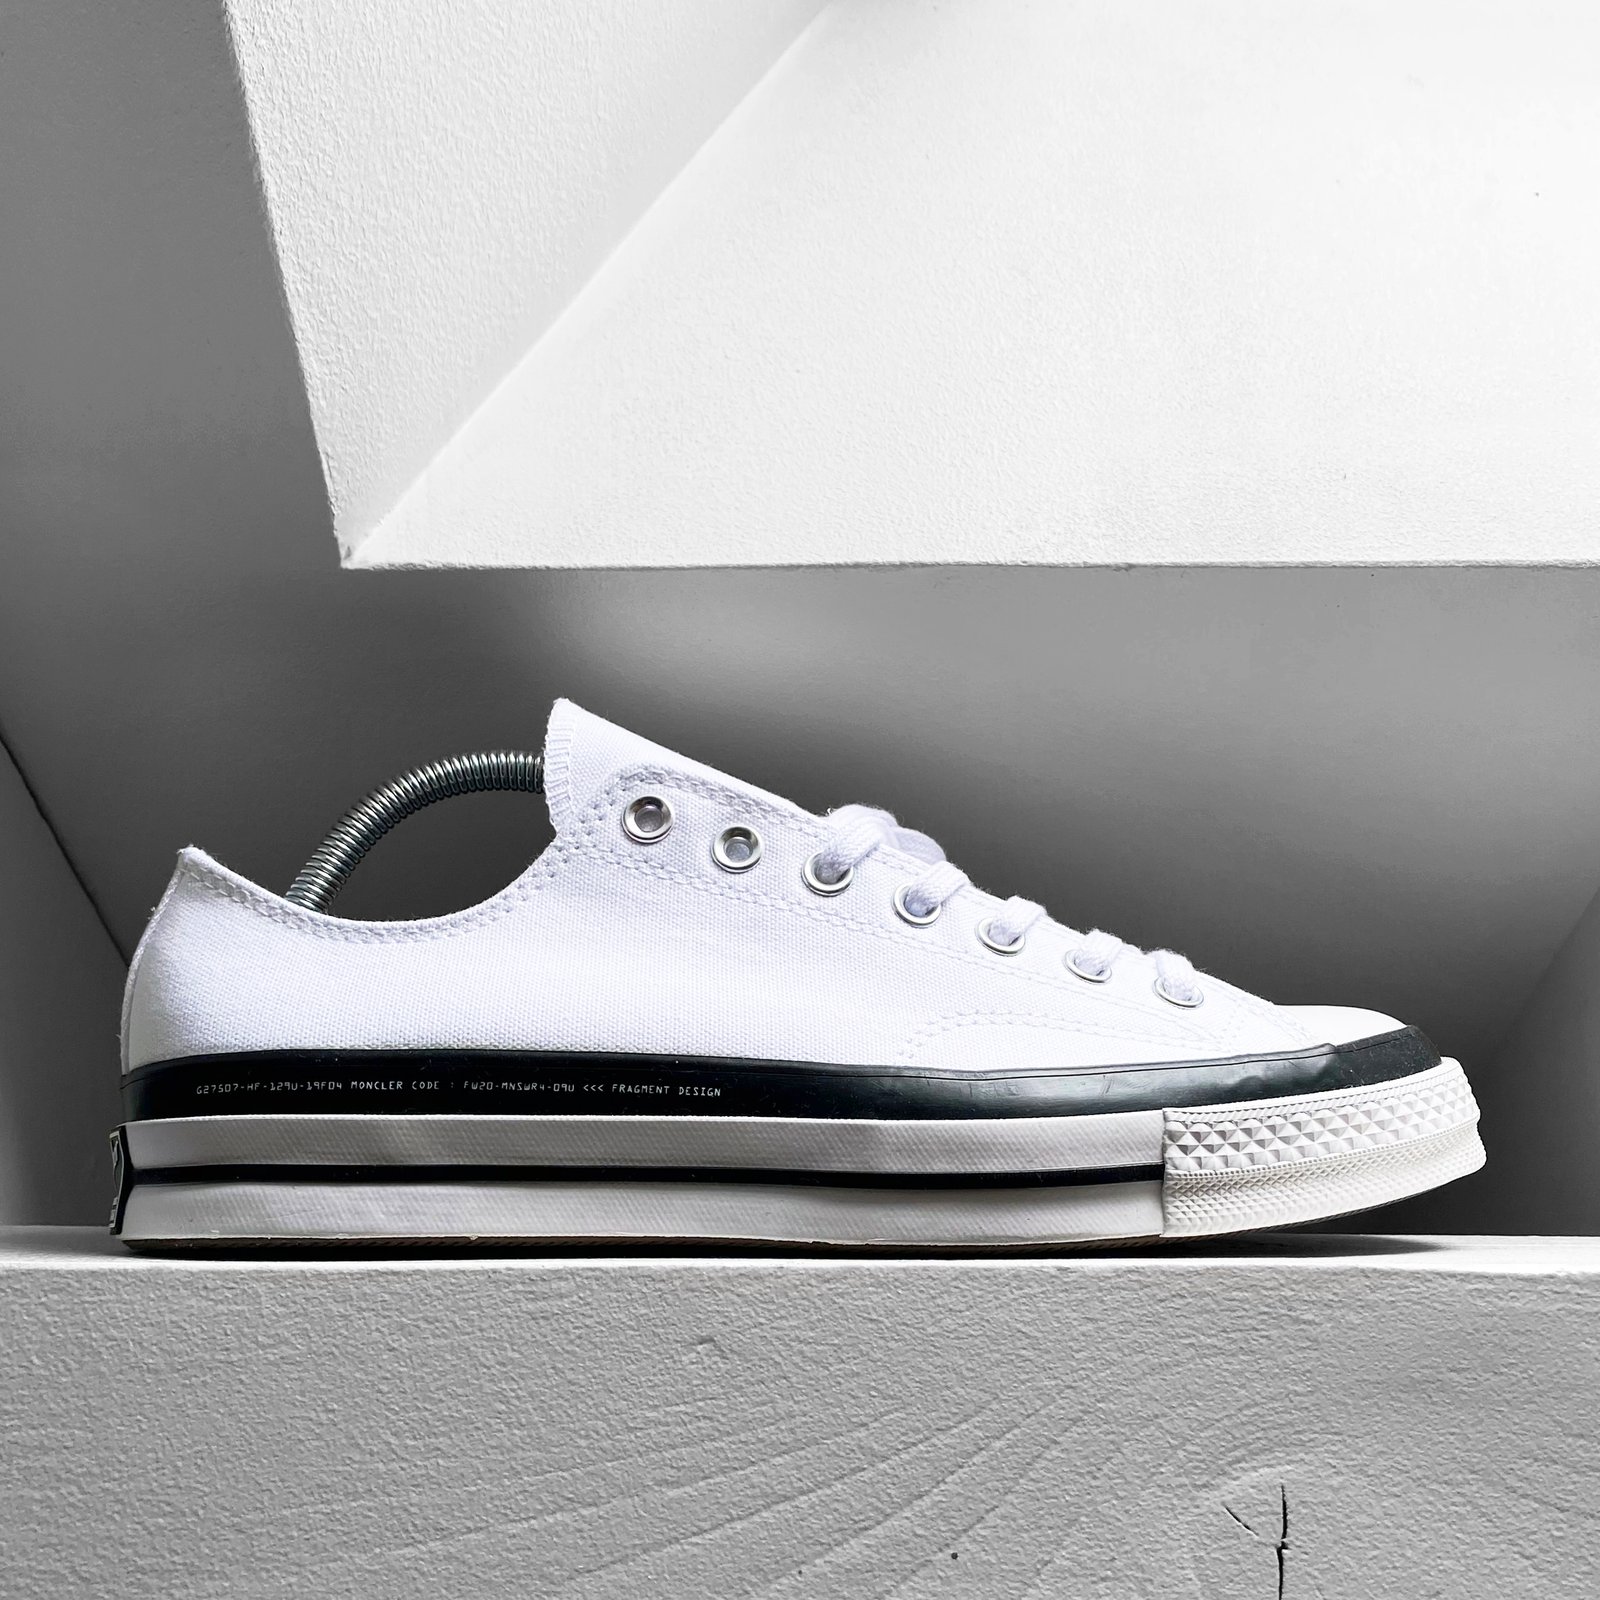 Converse Chuck Taylor All-Star 70s Ox 7 Moncler Fragment White